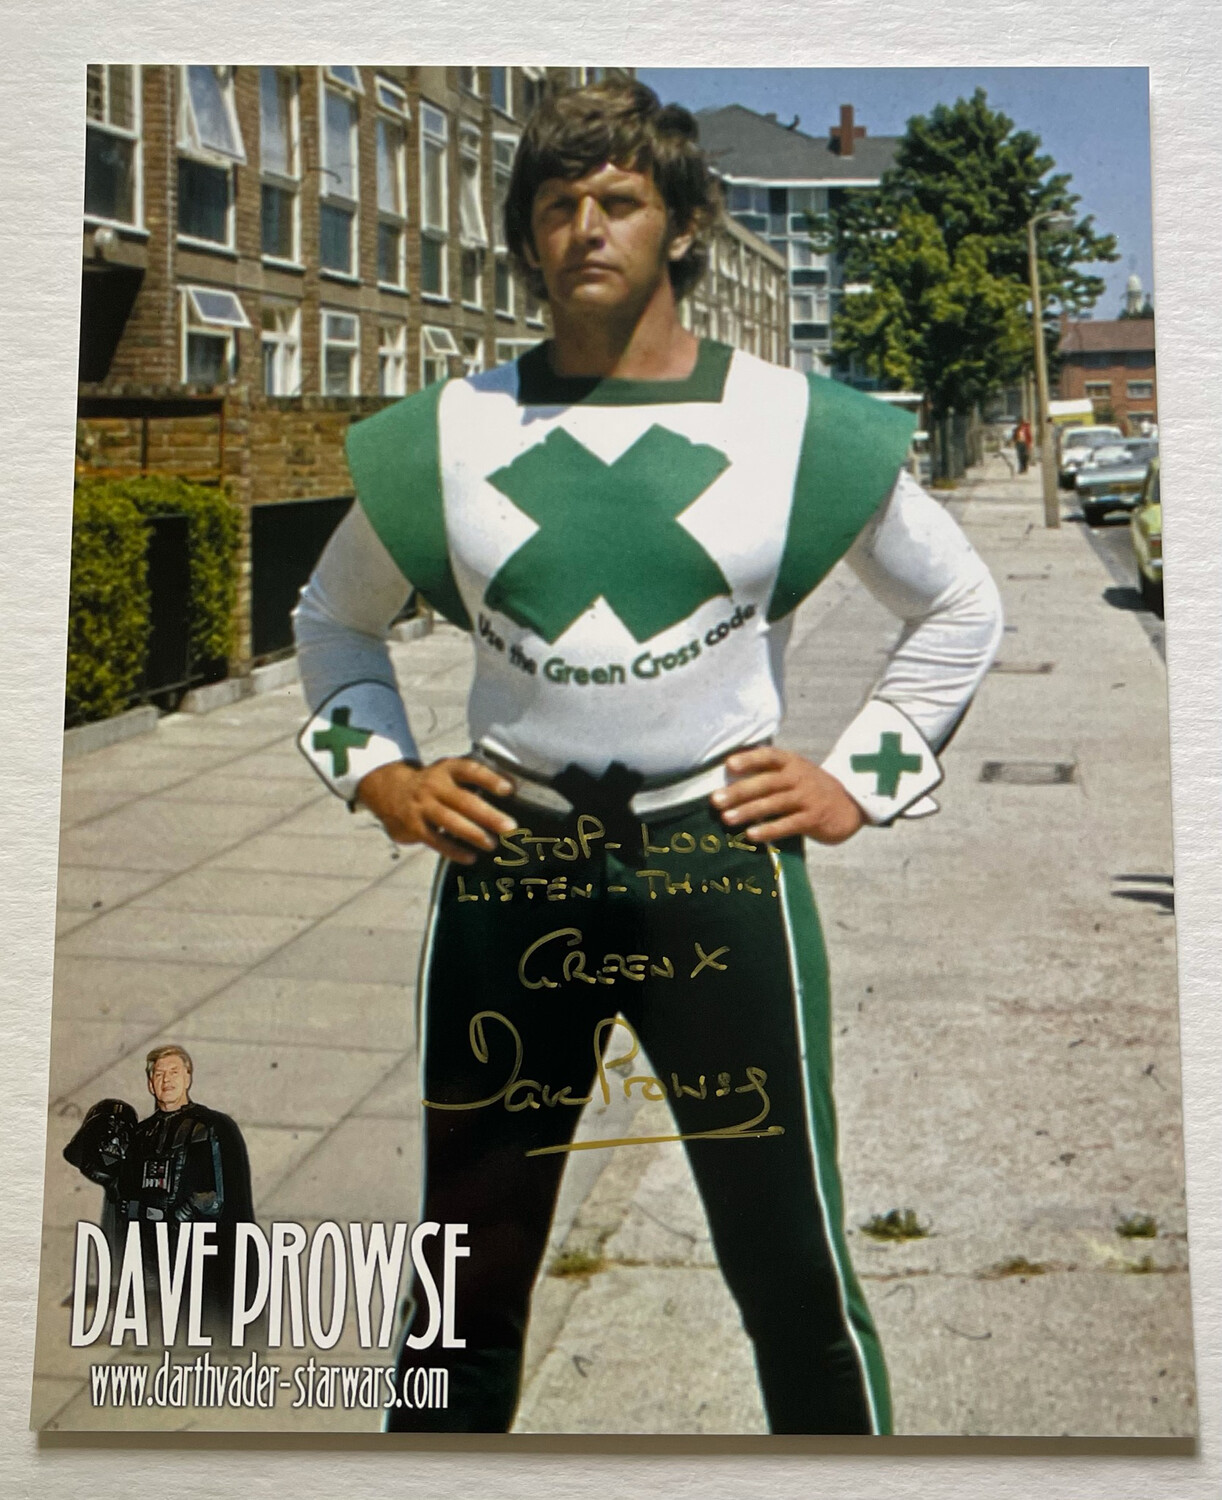 8X10 GREEN CROSS MAN PHOTO SIGNED BY DAVE PROWSE